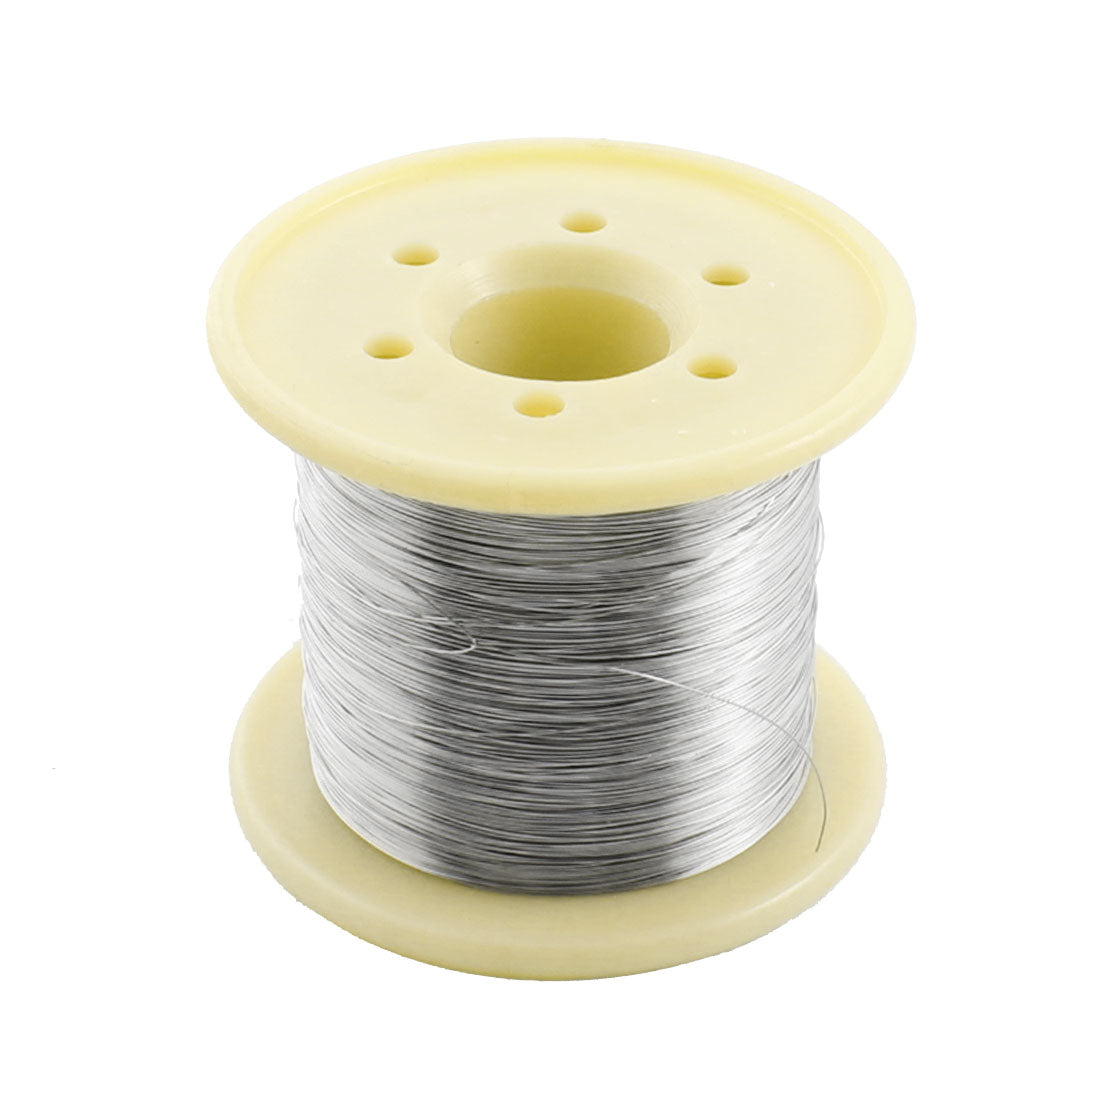 uxcell Uxcell 100meter 330ft Length 0.2mm AWG32 Resistance Heating Coils Resistor Wire Cable